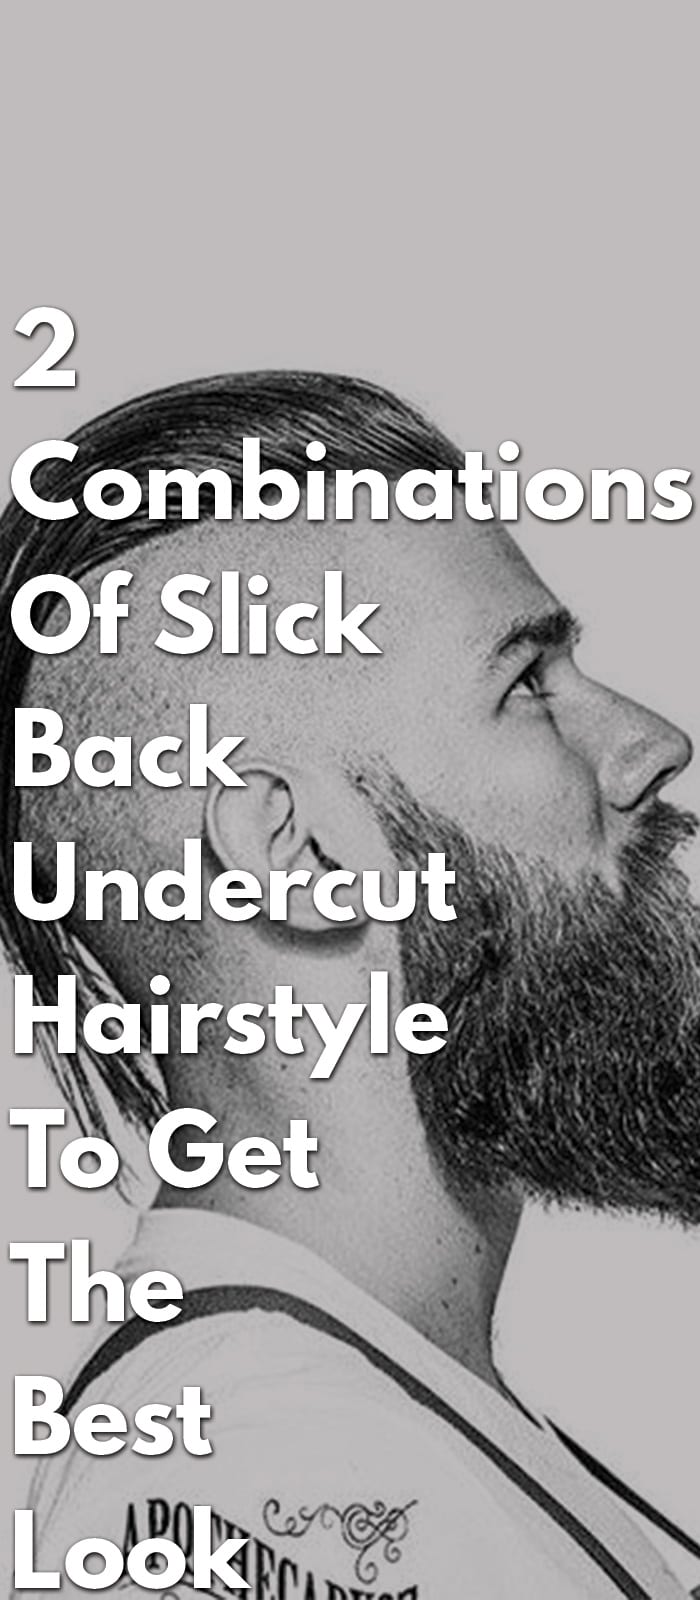 2 Combinations Of Slick Back Undercut Hairstyle To Get The Best Look